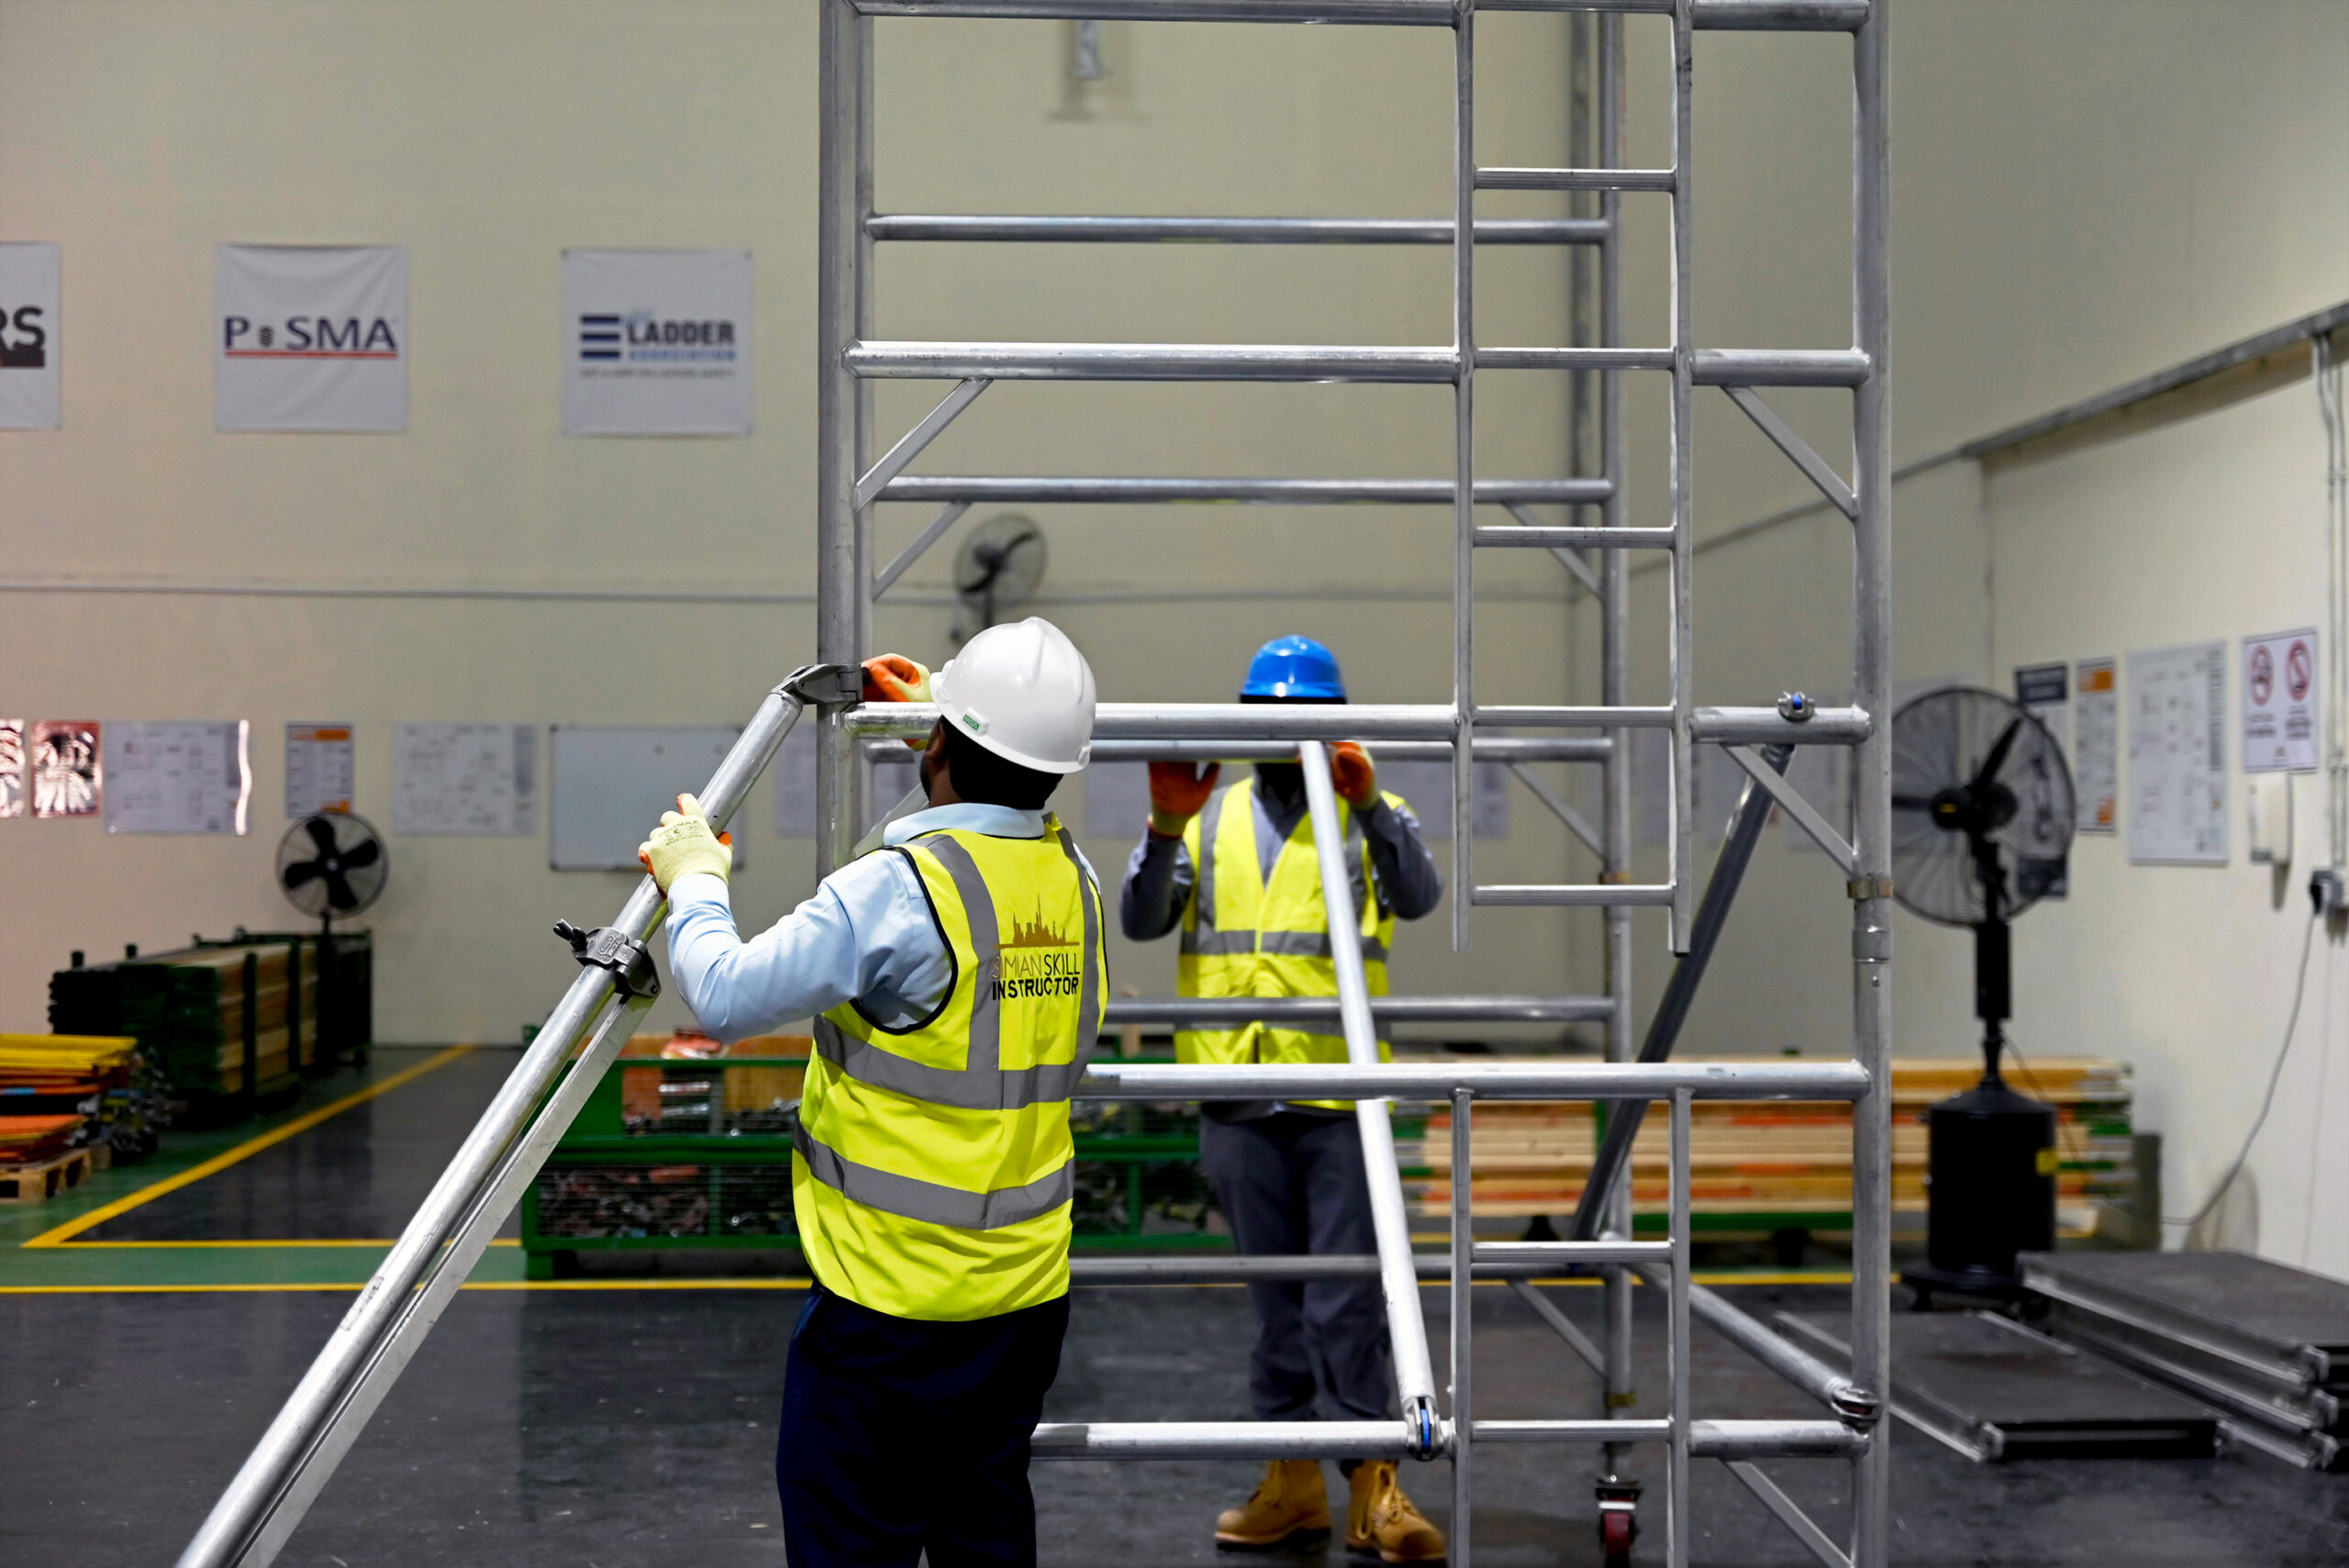 SIMIAN providing PASMA Training in uae and its best pasma scaffold training centre in world